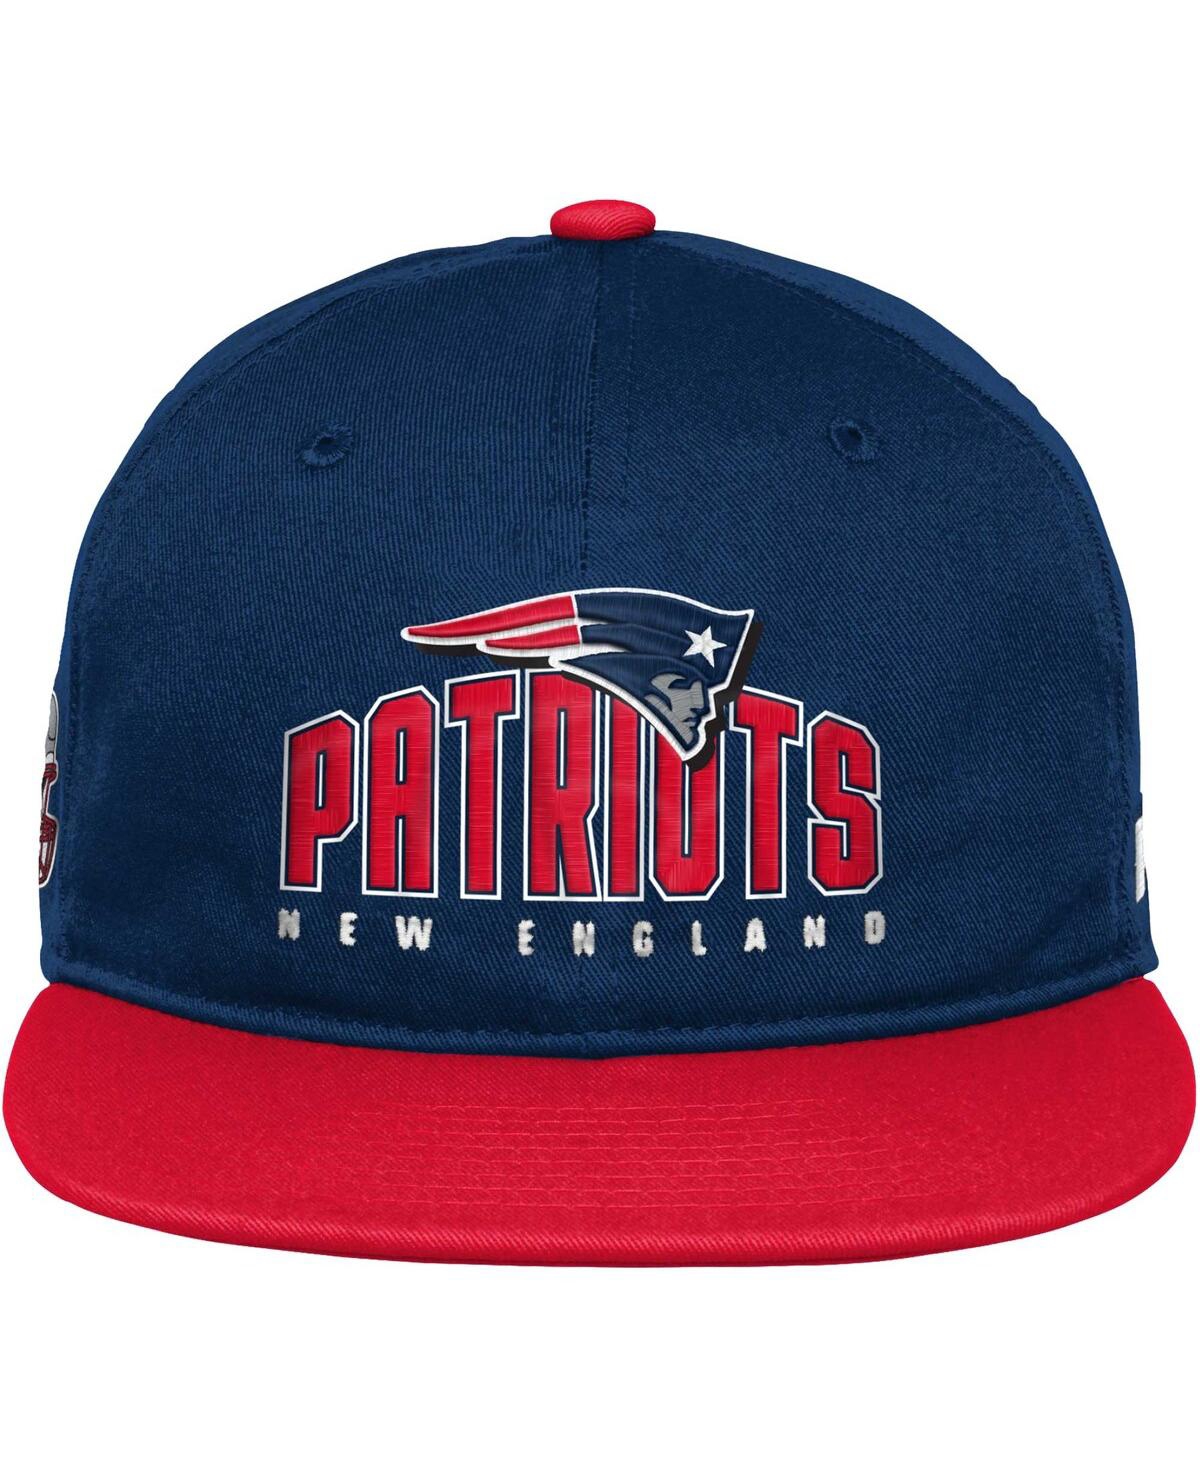 Shop Outerstuff Youth Boys And Girls Navy New England Patriots Legacy Deadstock Snapback Hat